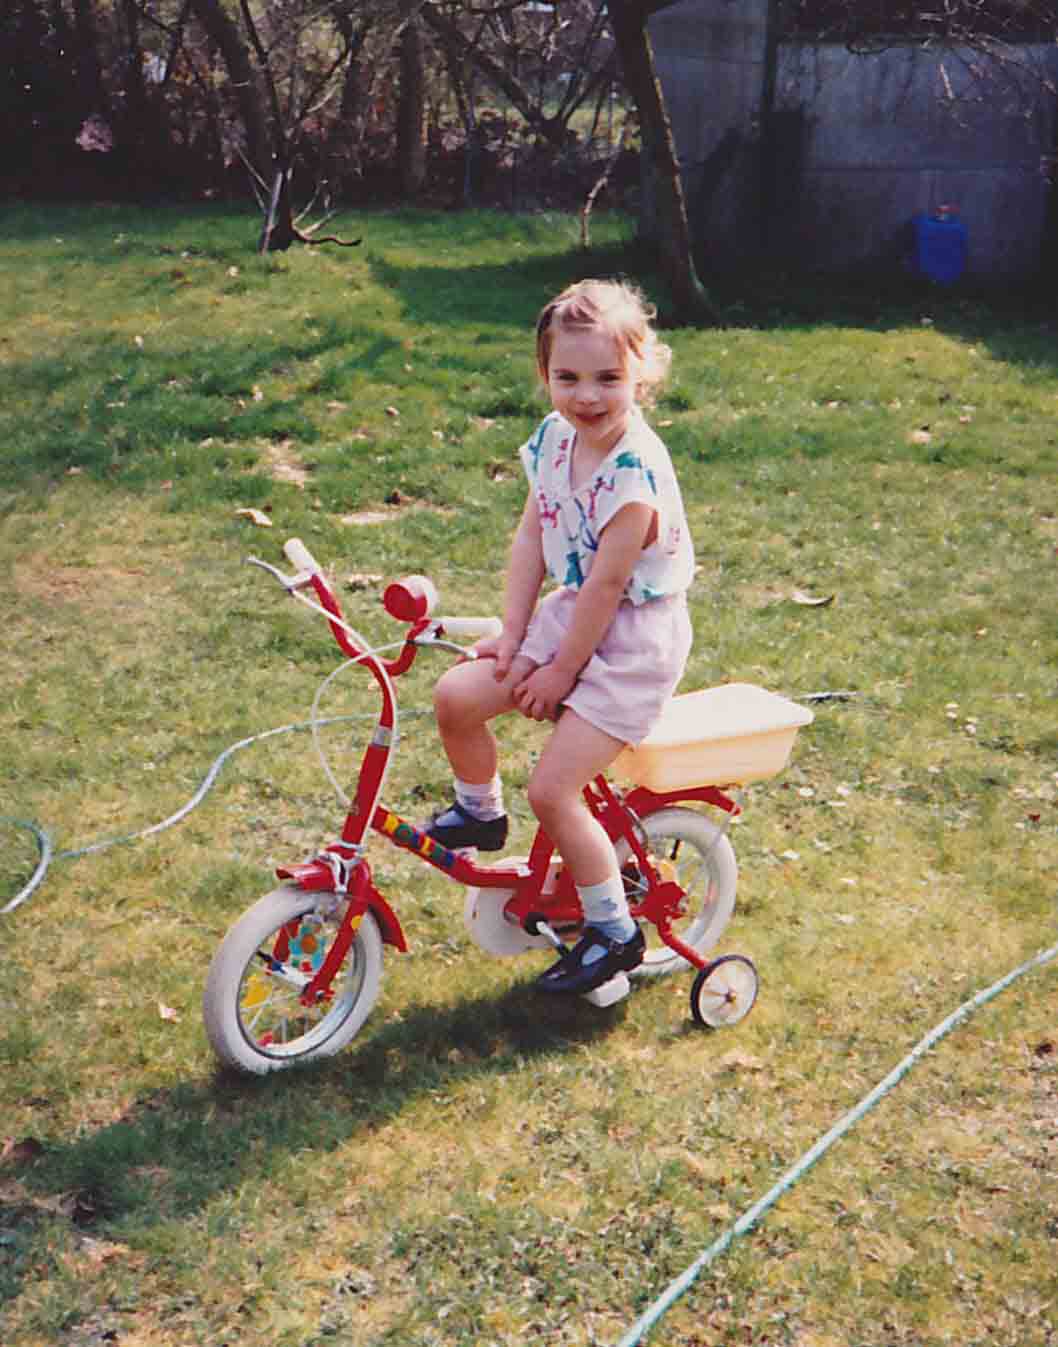 Laura on her Raleigh bicycle